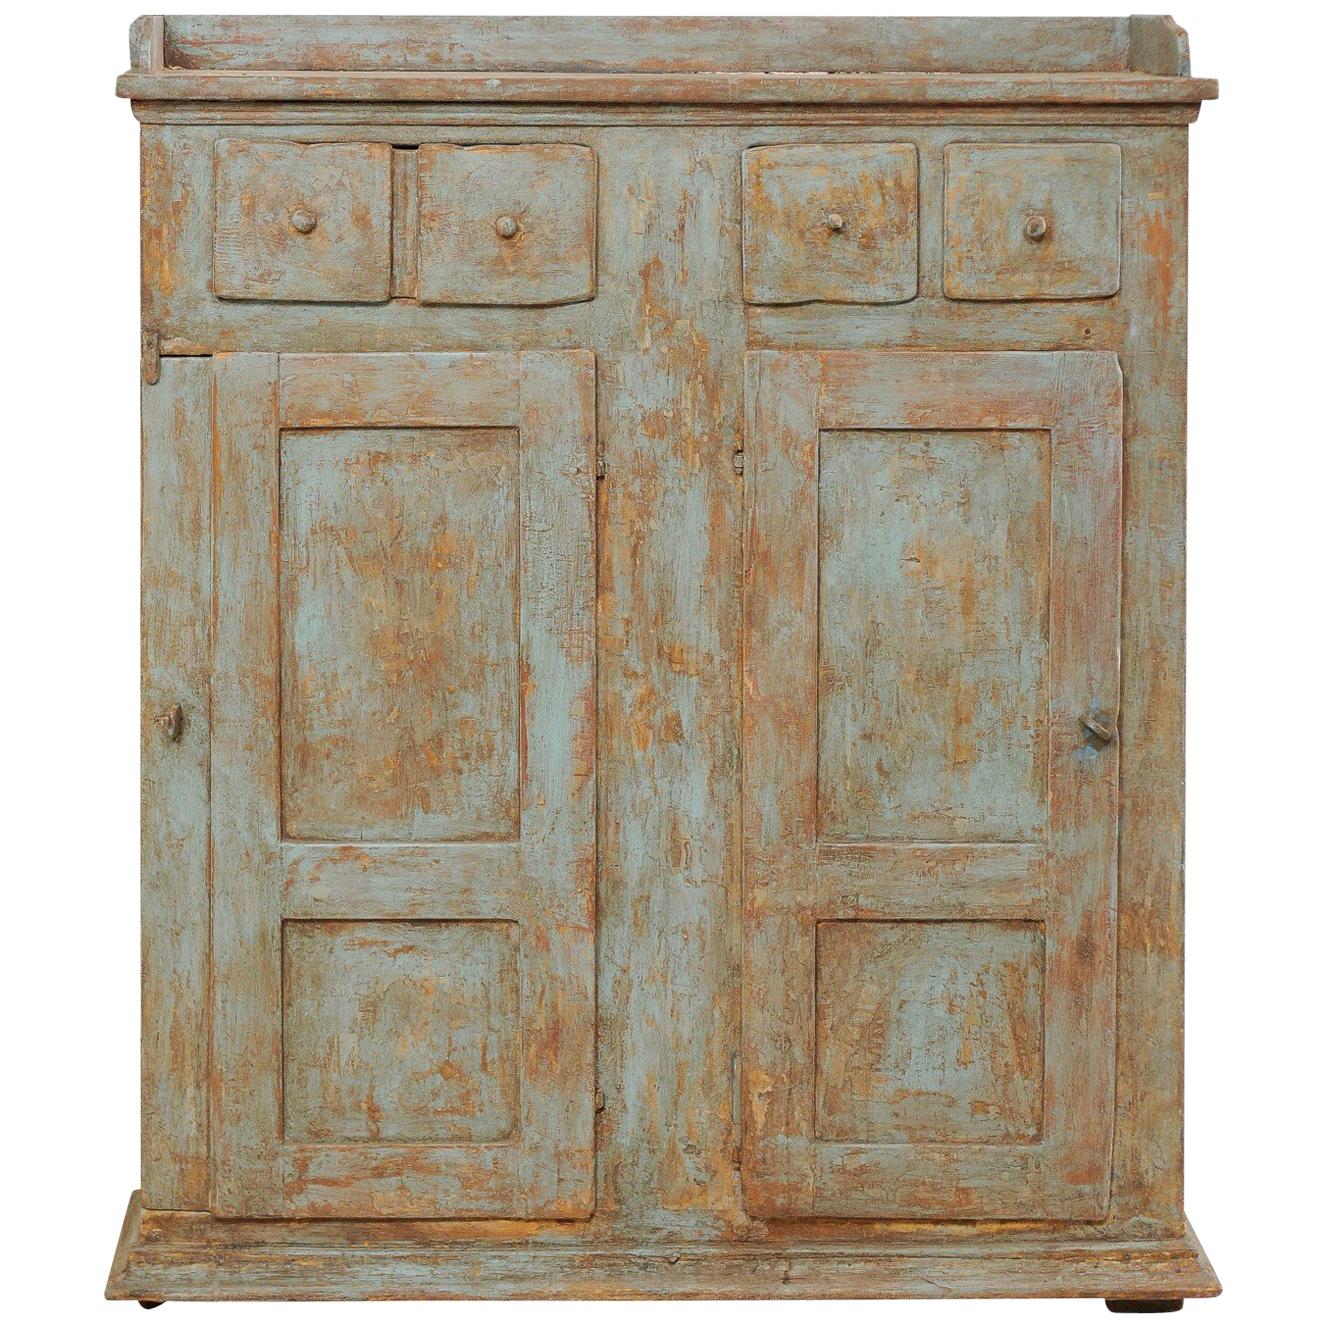 18th Century Swedish Cabinet with Lovely Scraped Blue Finish